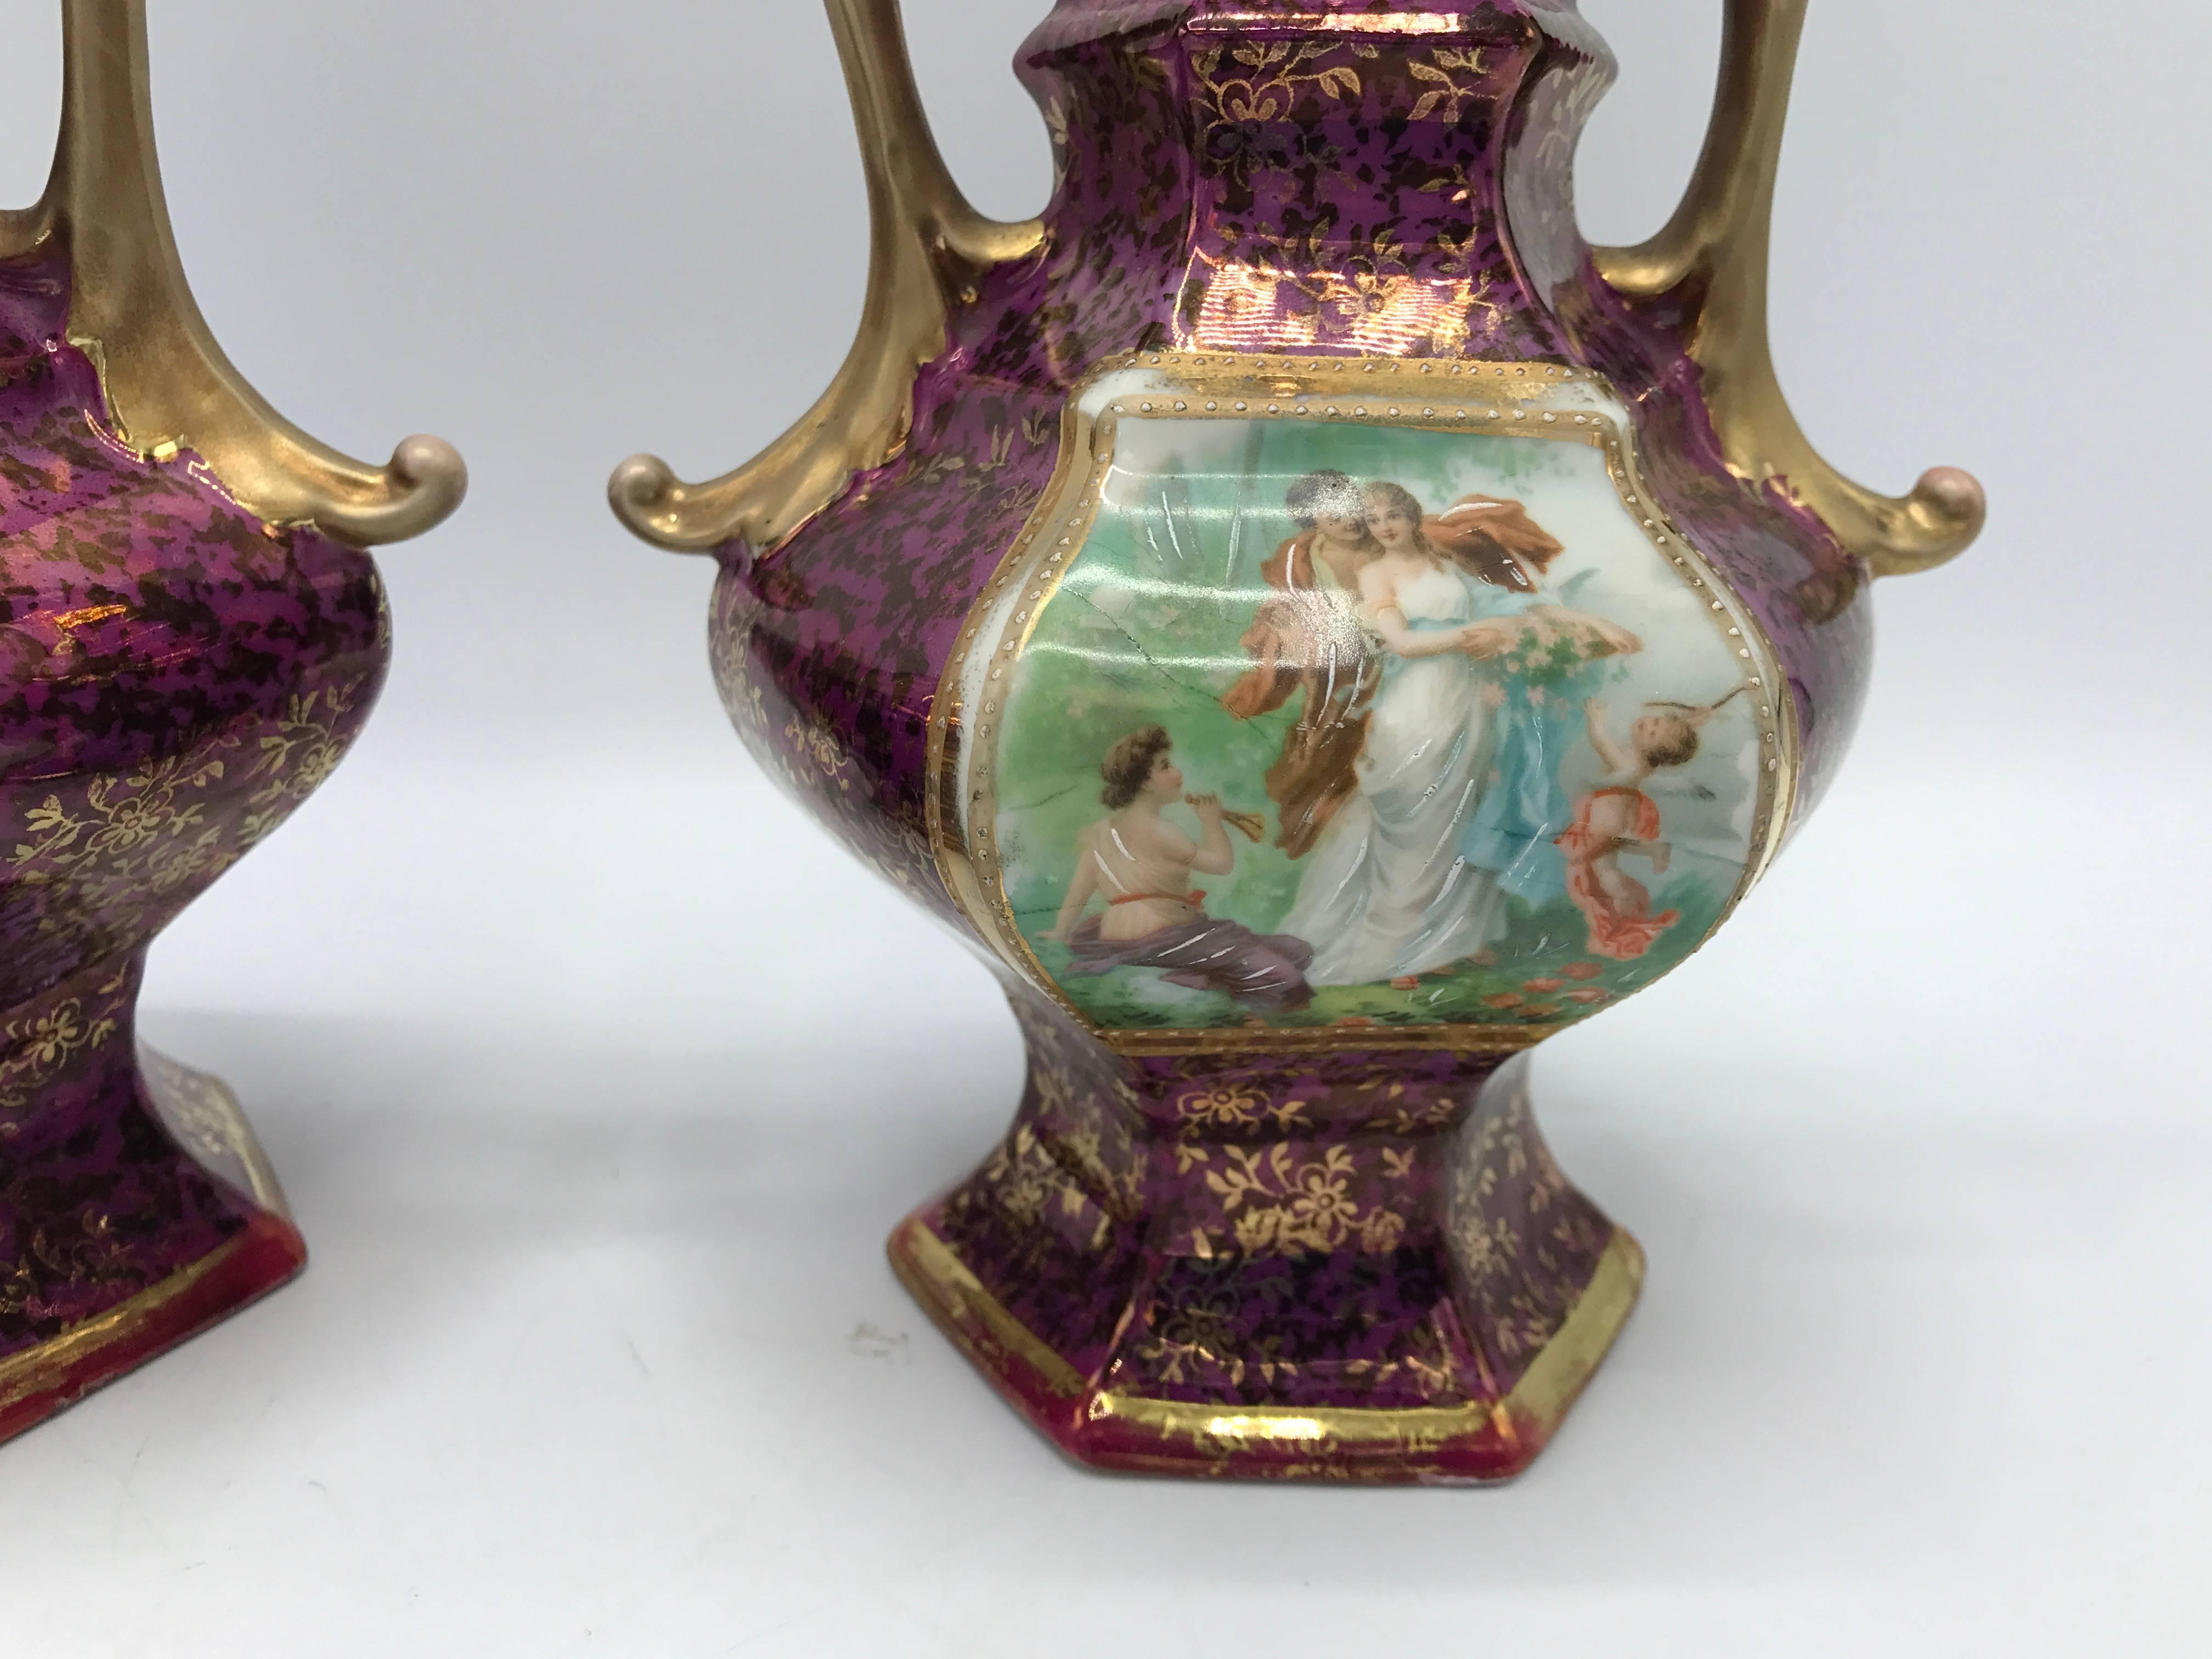 Porcelain 19th Century French Hand-Painted Pink and Gold Vases with Handles, Pair